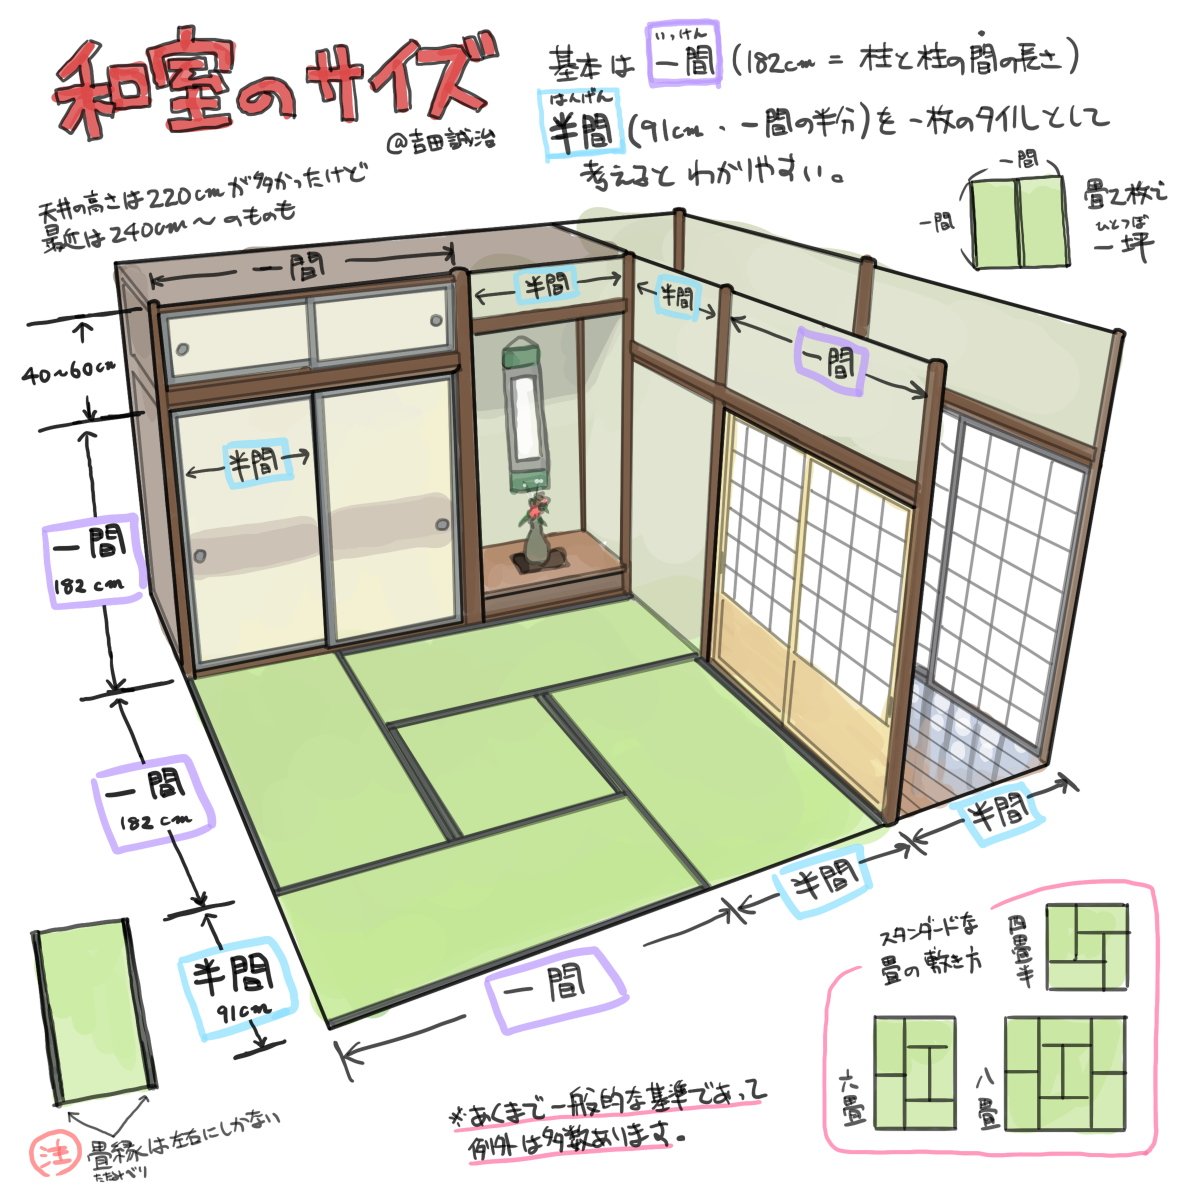 Modular Japanese Town House Example Maps: MS_TeaHouse_1 – Inu Games